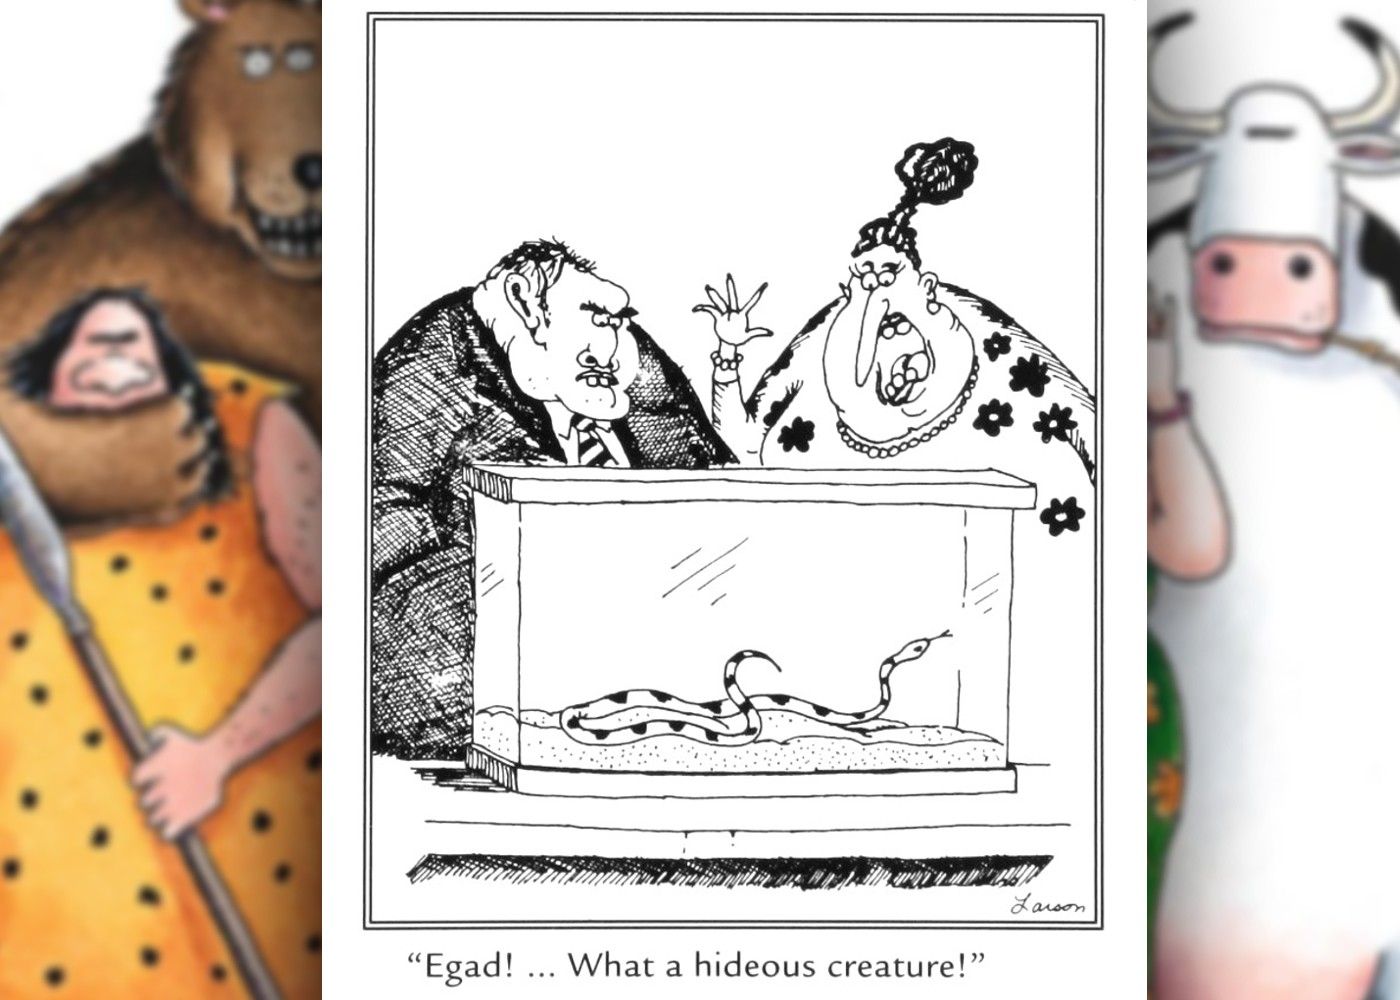 far side eighth comic, two ugly people call a snake ugly